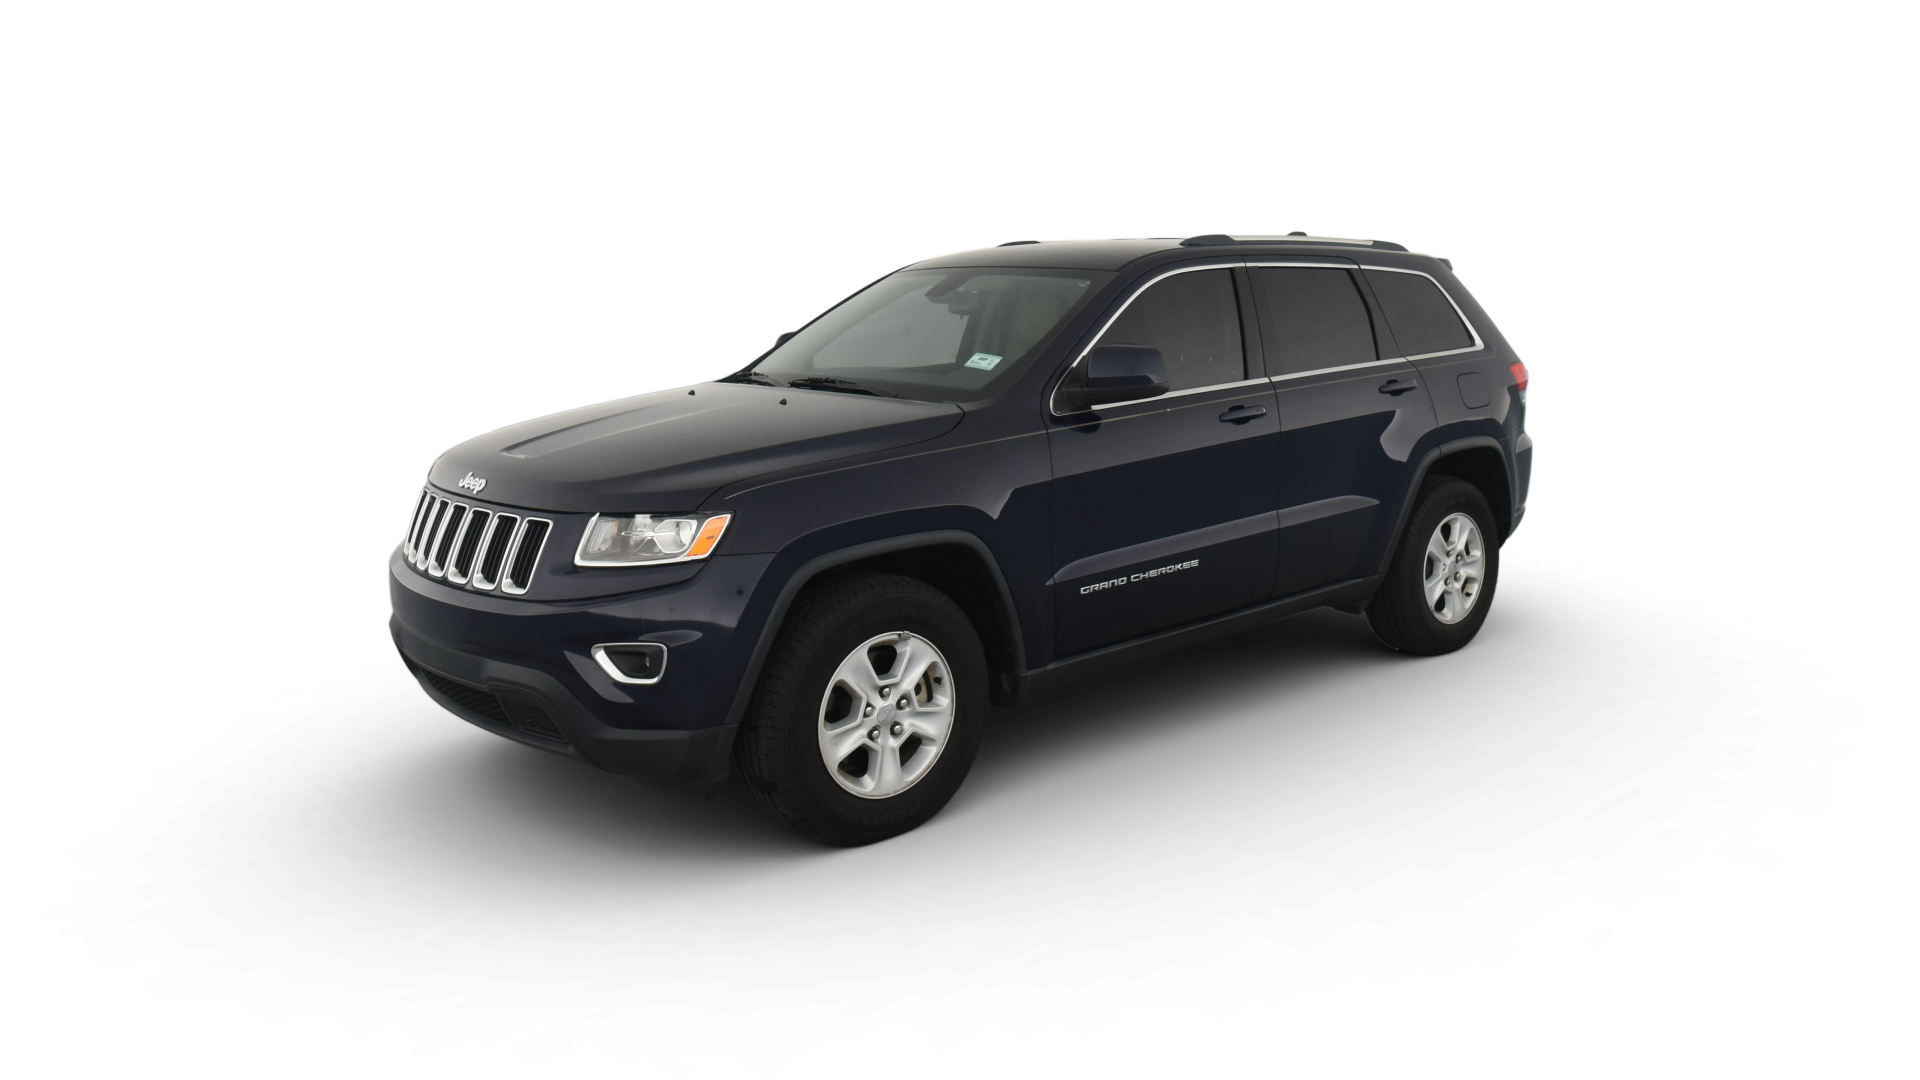 Used 2015 Jeep Grand Cherokee For Sale Online | Carvana